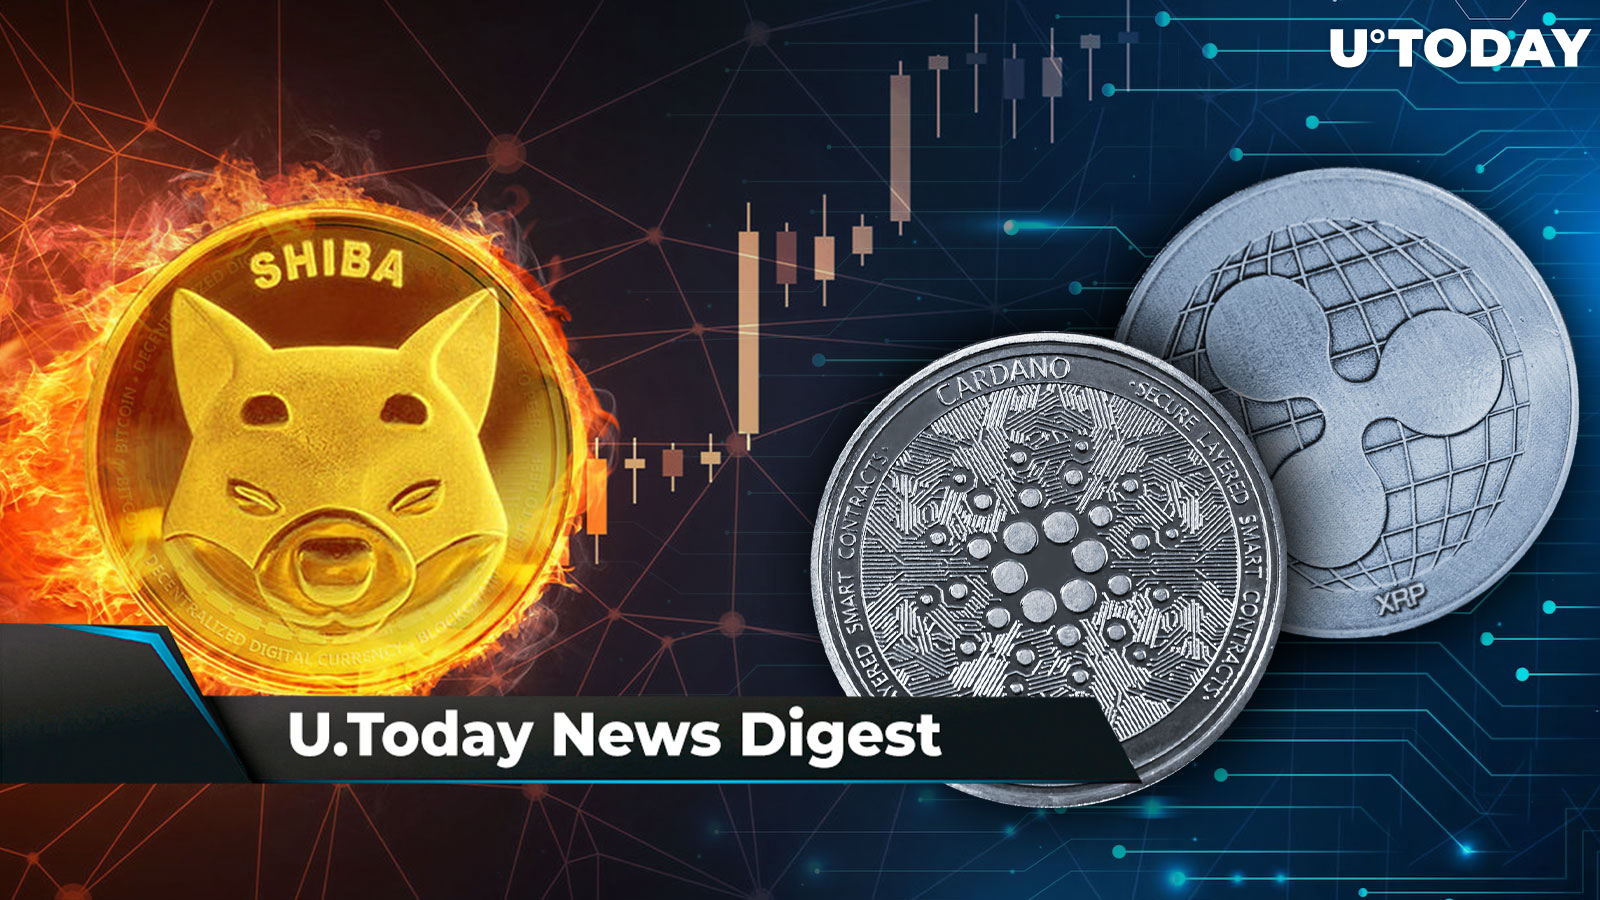 SHIB Burns Jump 550%, Santiment Calls to Keep Eye on XRP and ADA, SHIB Army Receives Warning as Fake SHIB 2.0 Gets Exposed: Crypto News Digest by U.Today